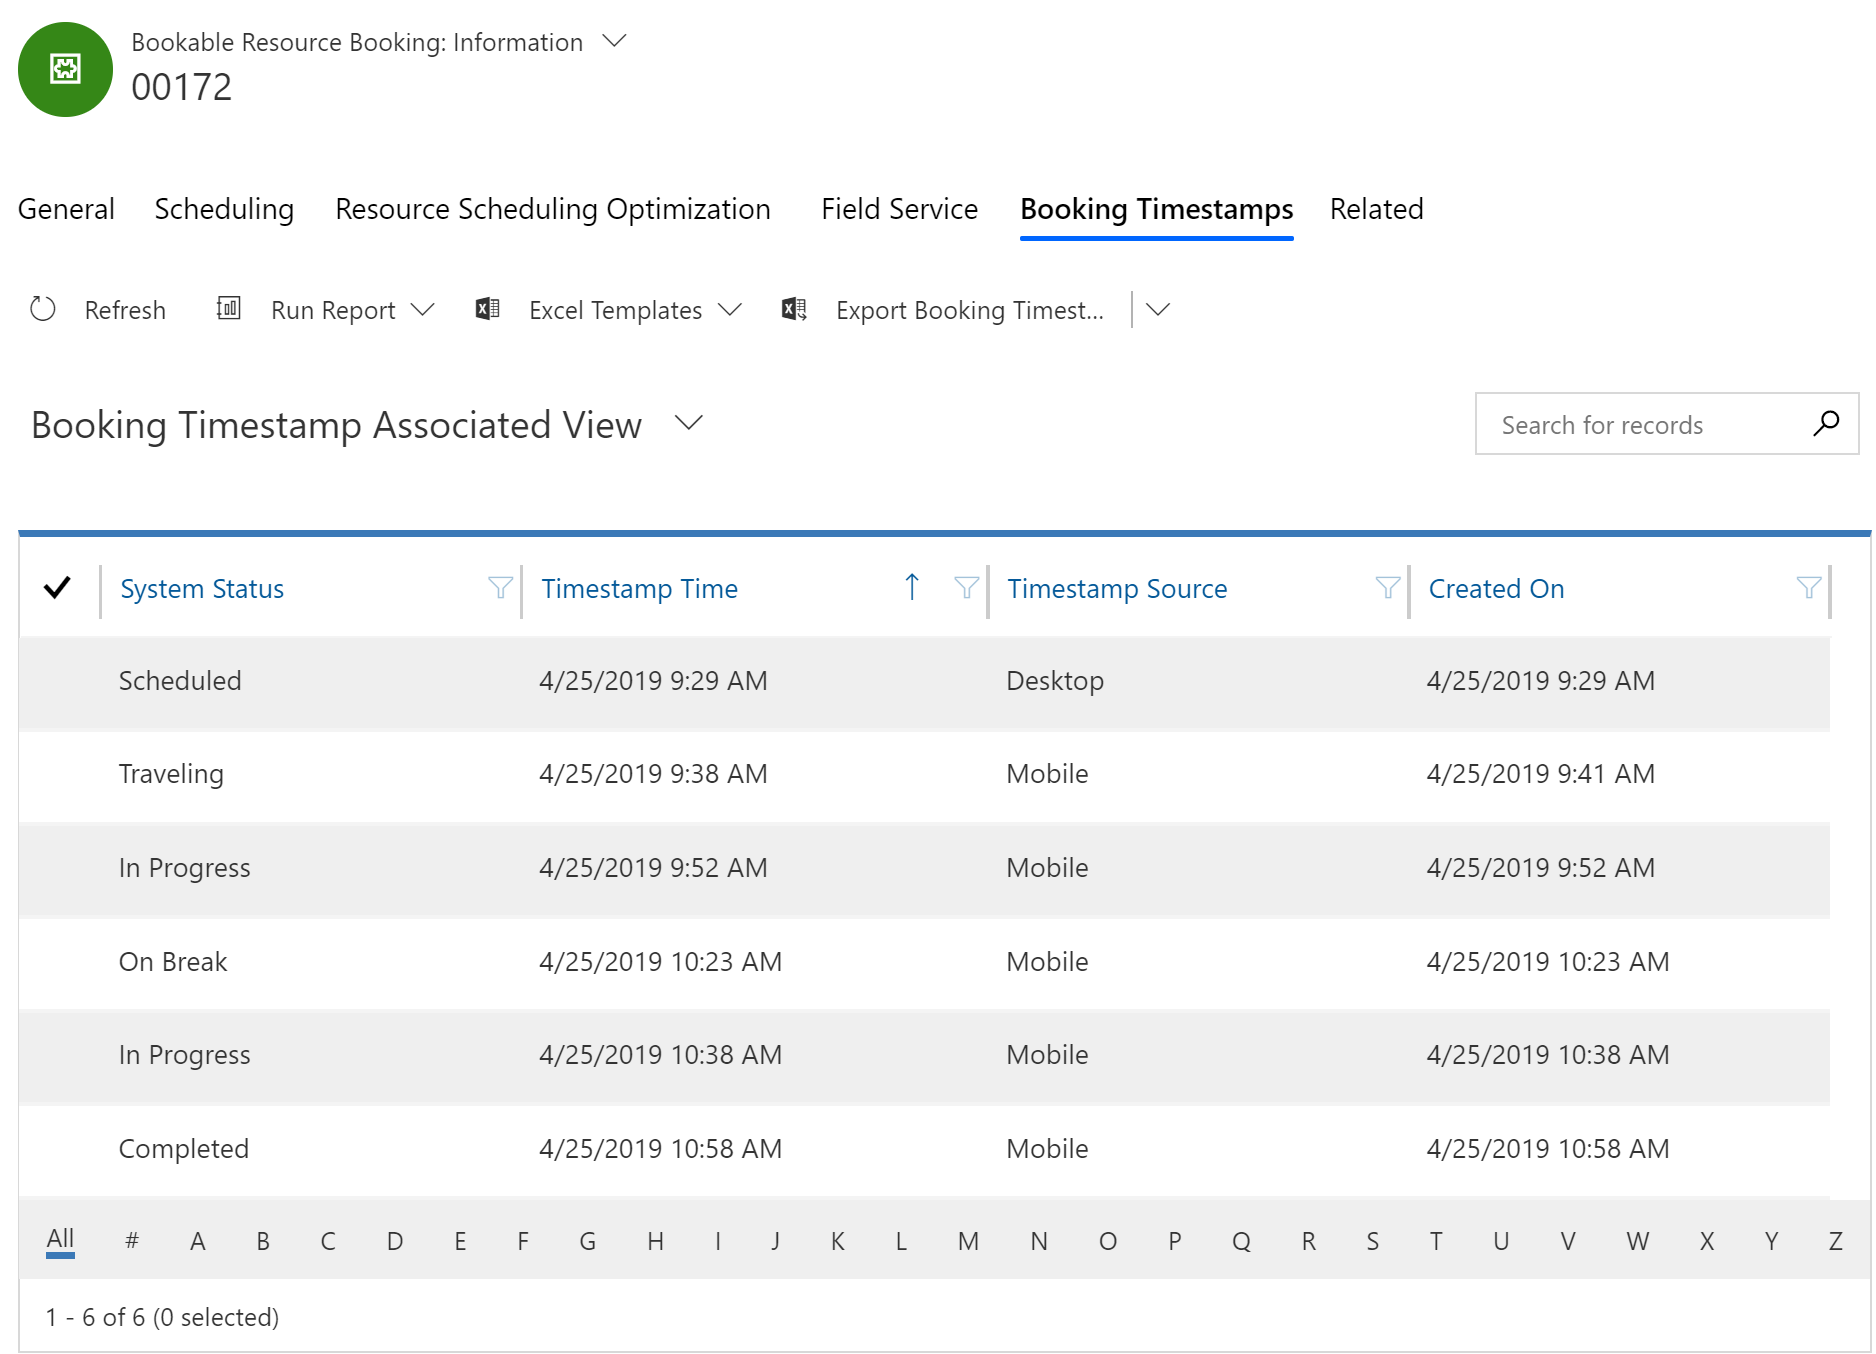 Screenshot of the Booking Information window, showing the Booking Timestamp tab with a System Status of Scheduled displaying multiple bookings.